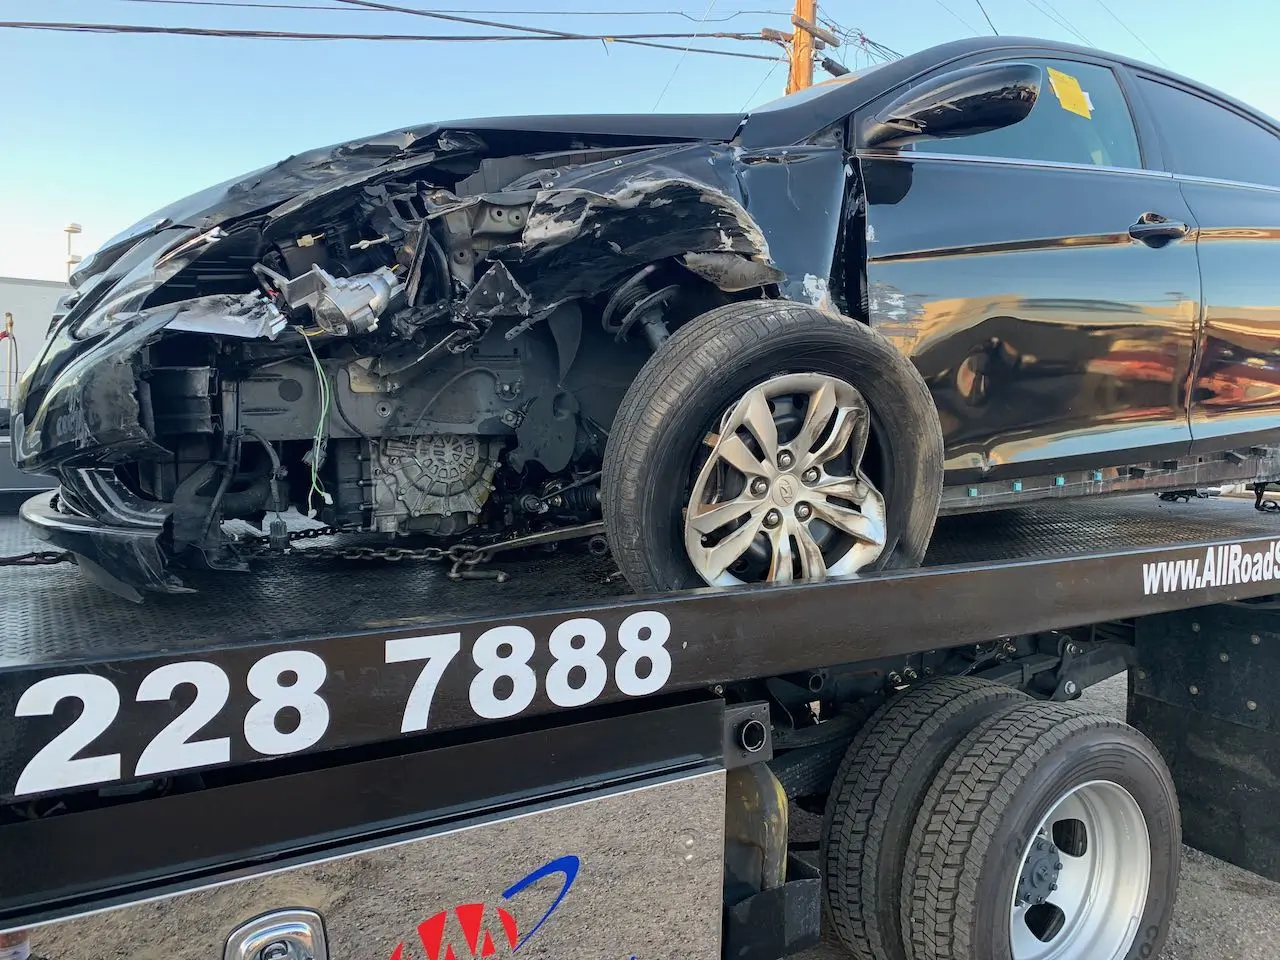 San Diego Towing will rescue even the most damaged vehicles.